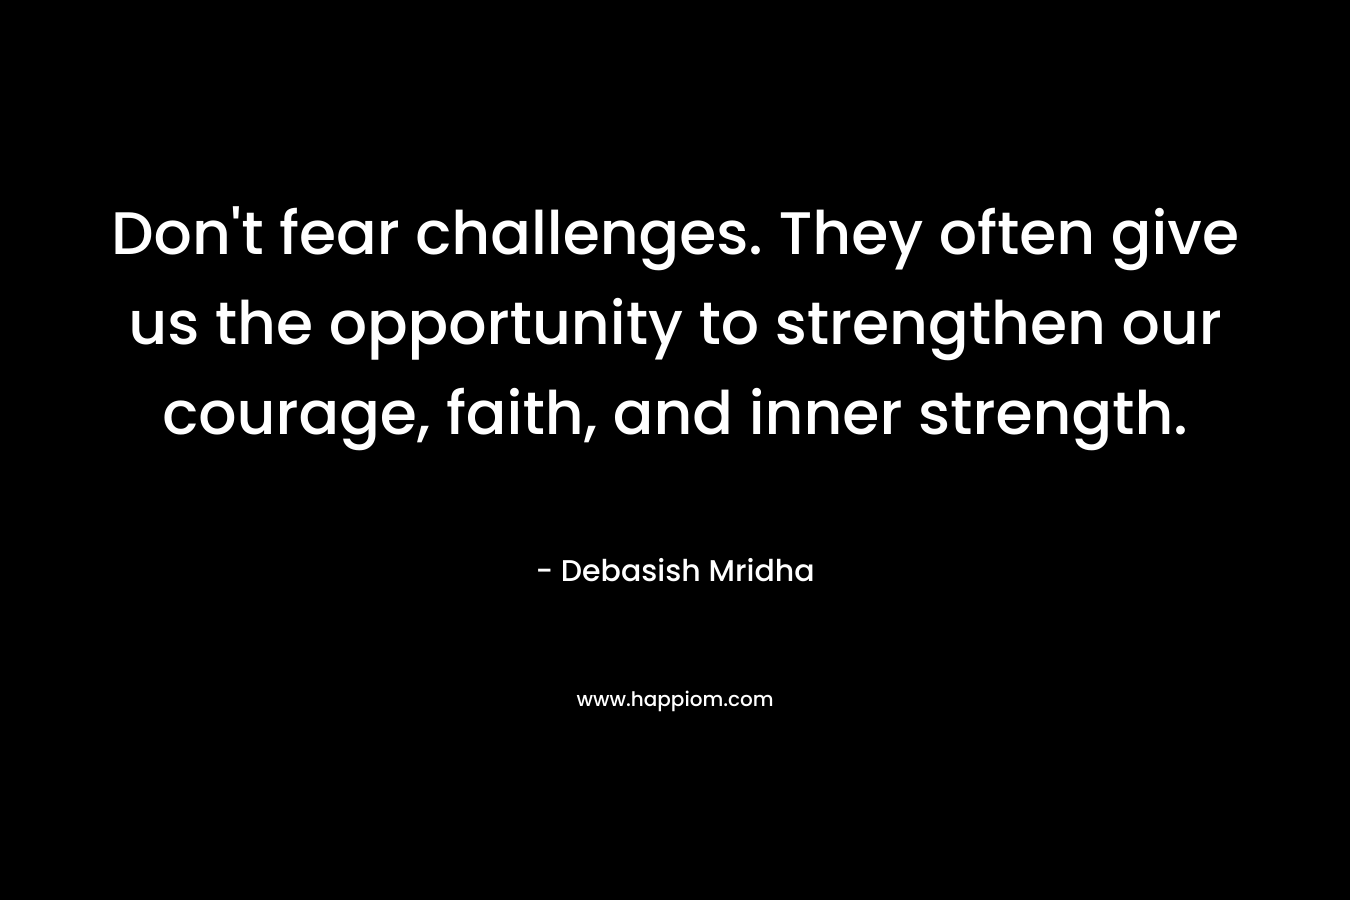 Don't fear challenges. They often give us the opportunity to strengthen our courage, faith, and inner strength.